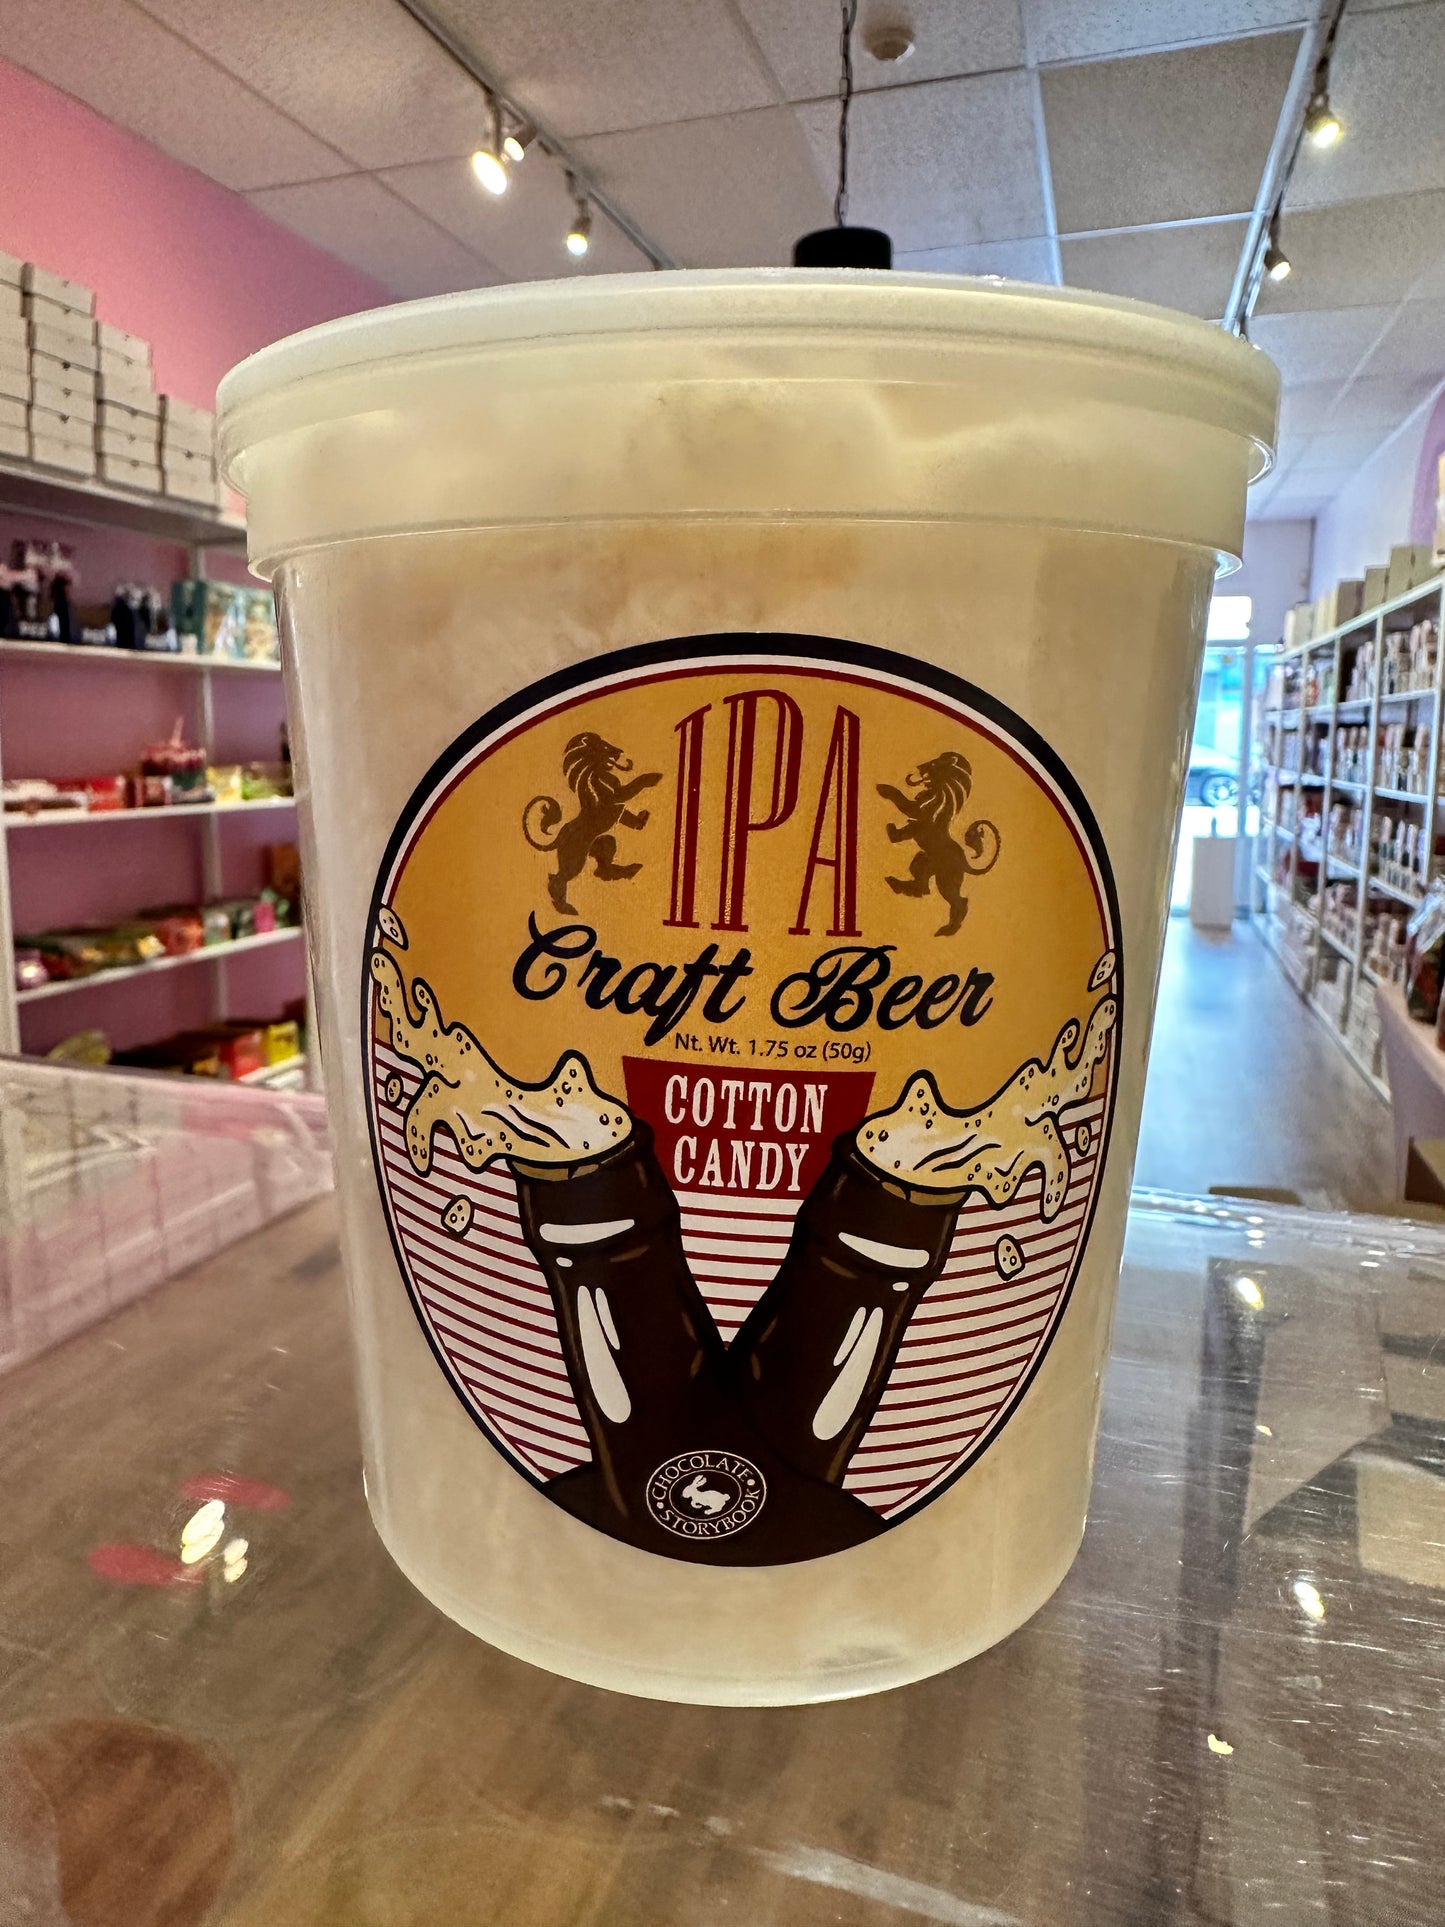 IPA Craft Beer Cotton Candy